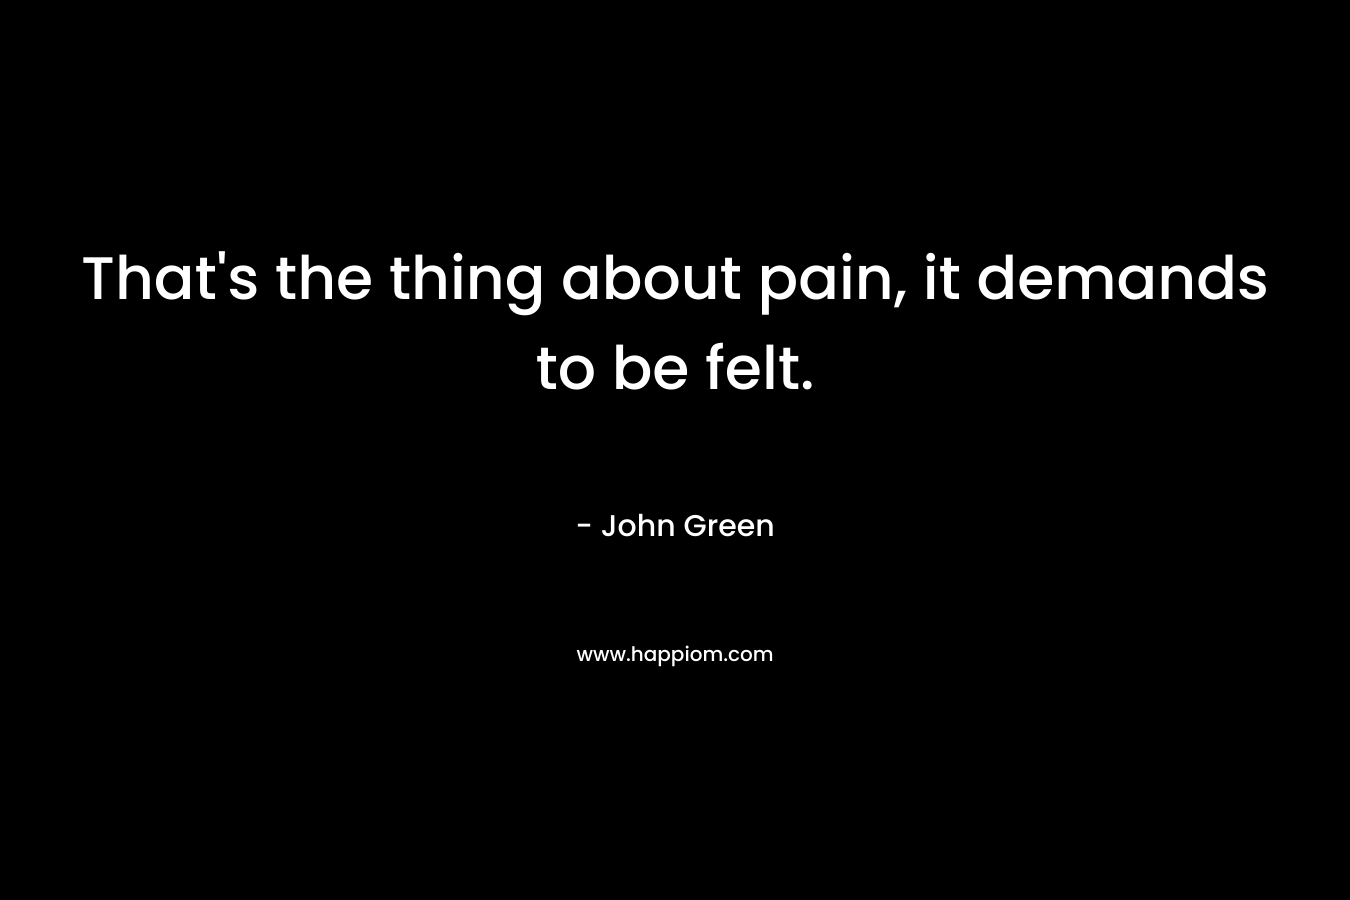 That's the thing about pain, it demands to be felt.